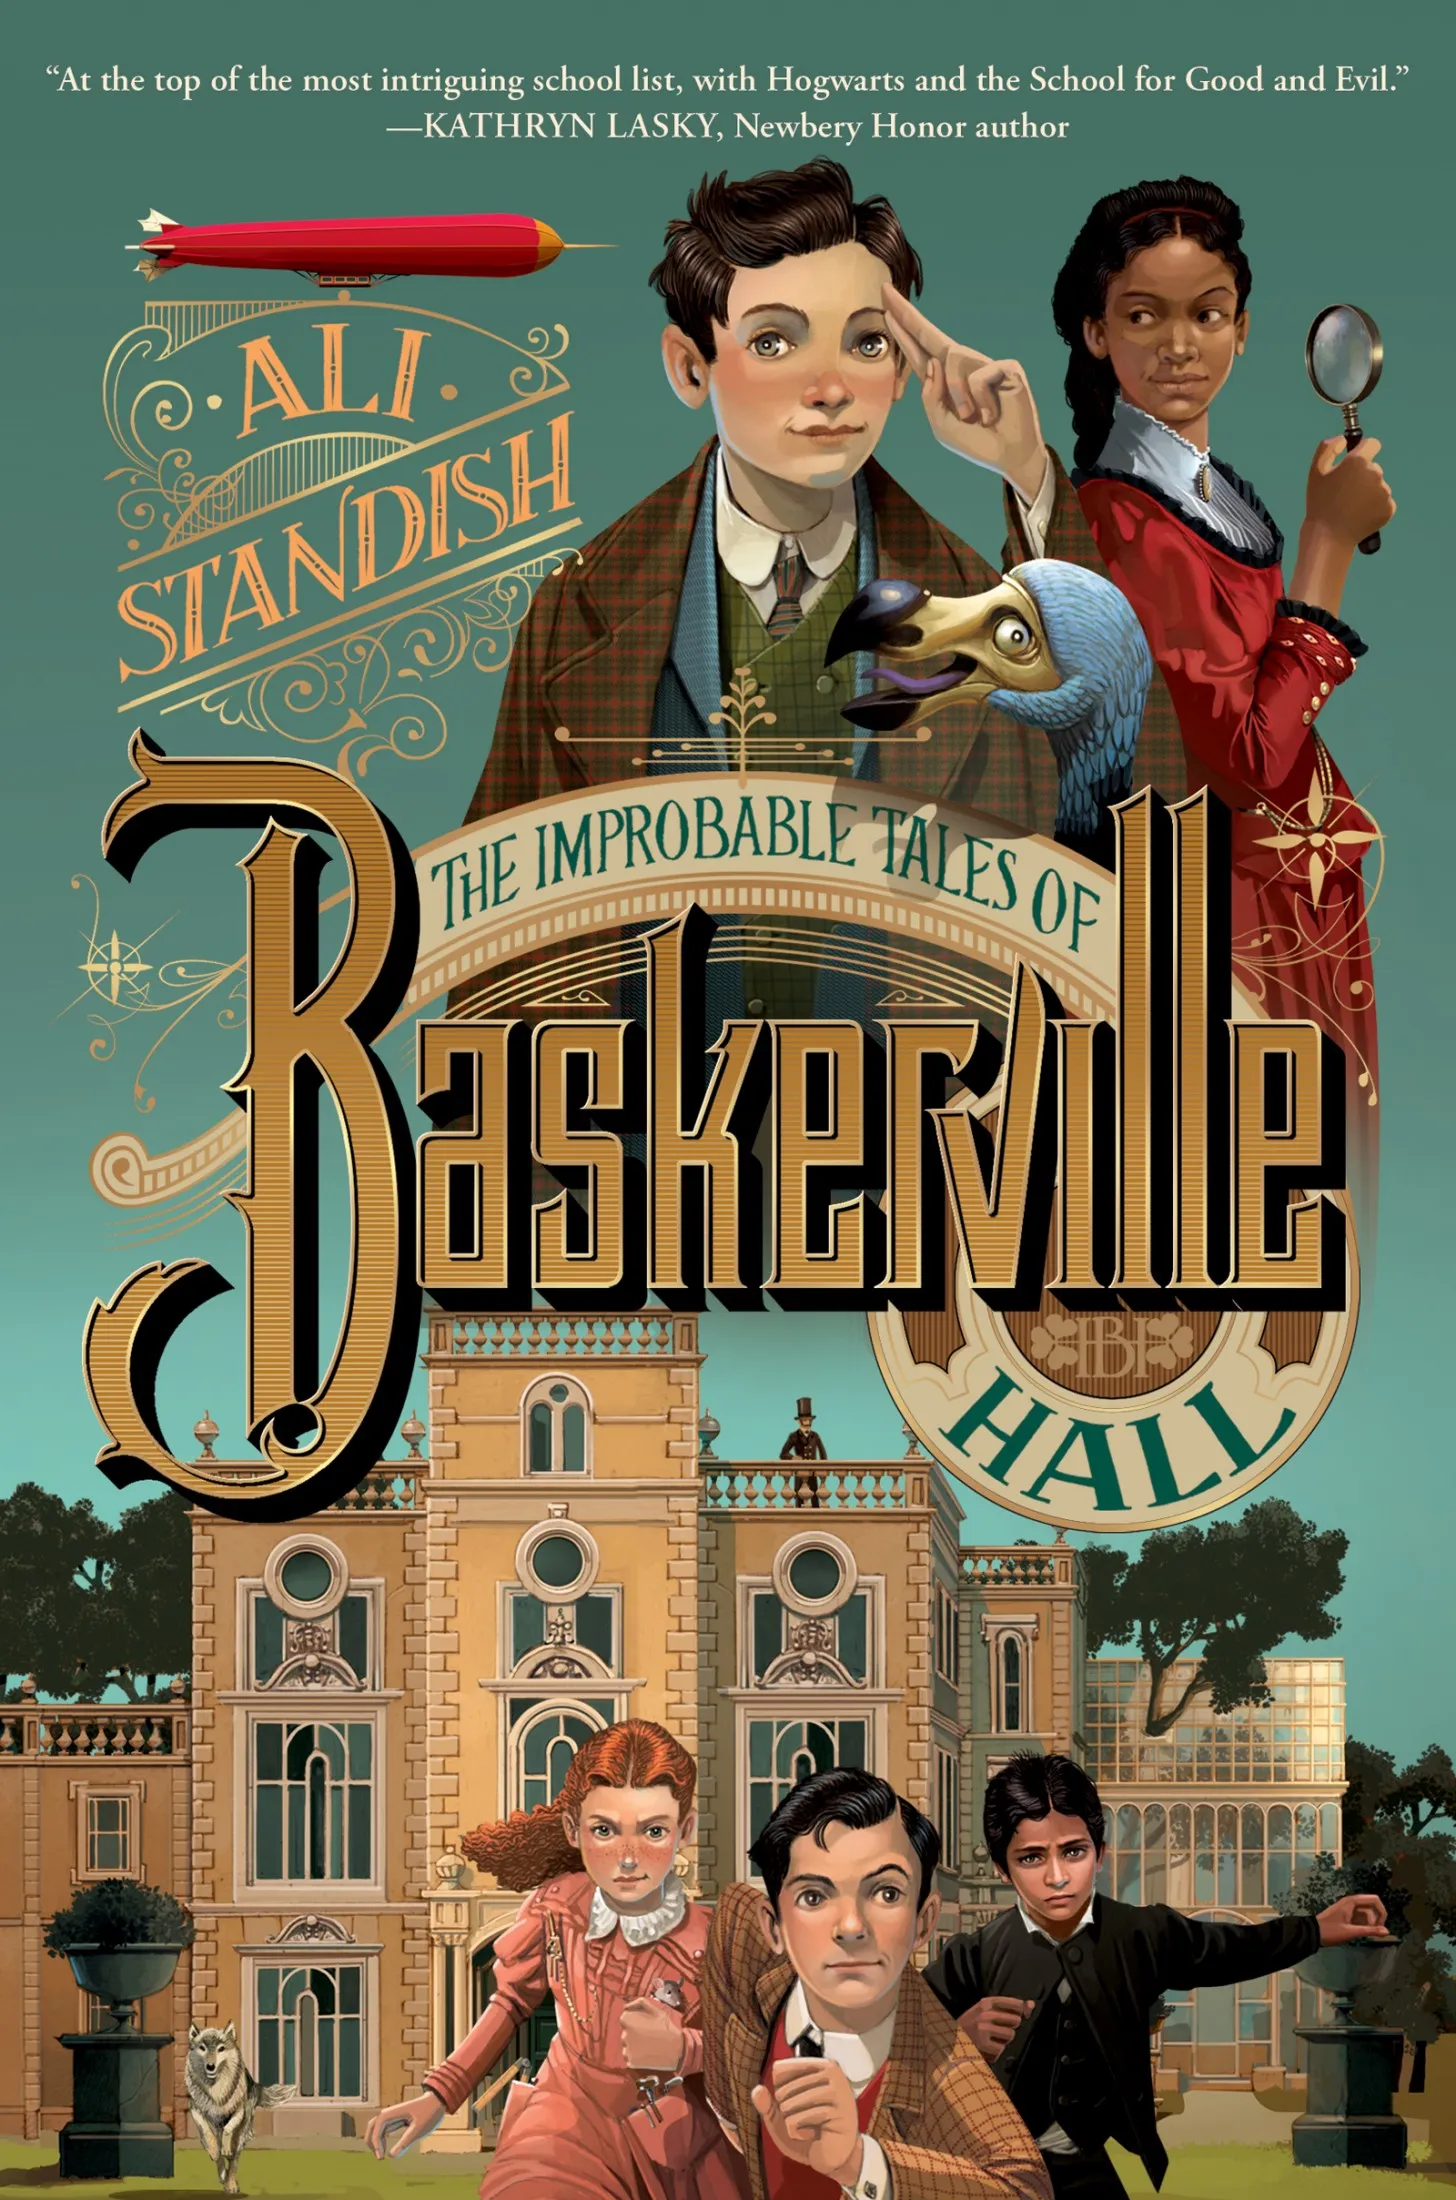 The Improbable Tales of Baskerville (Hall Book #1)